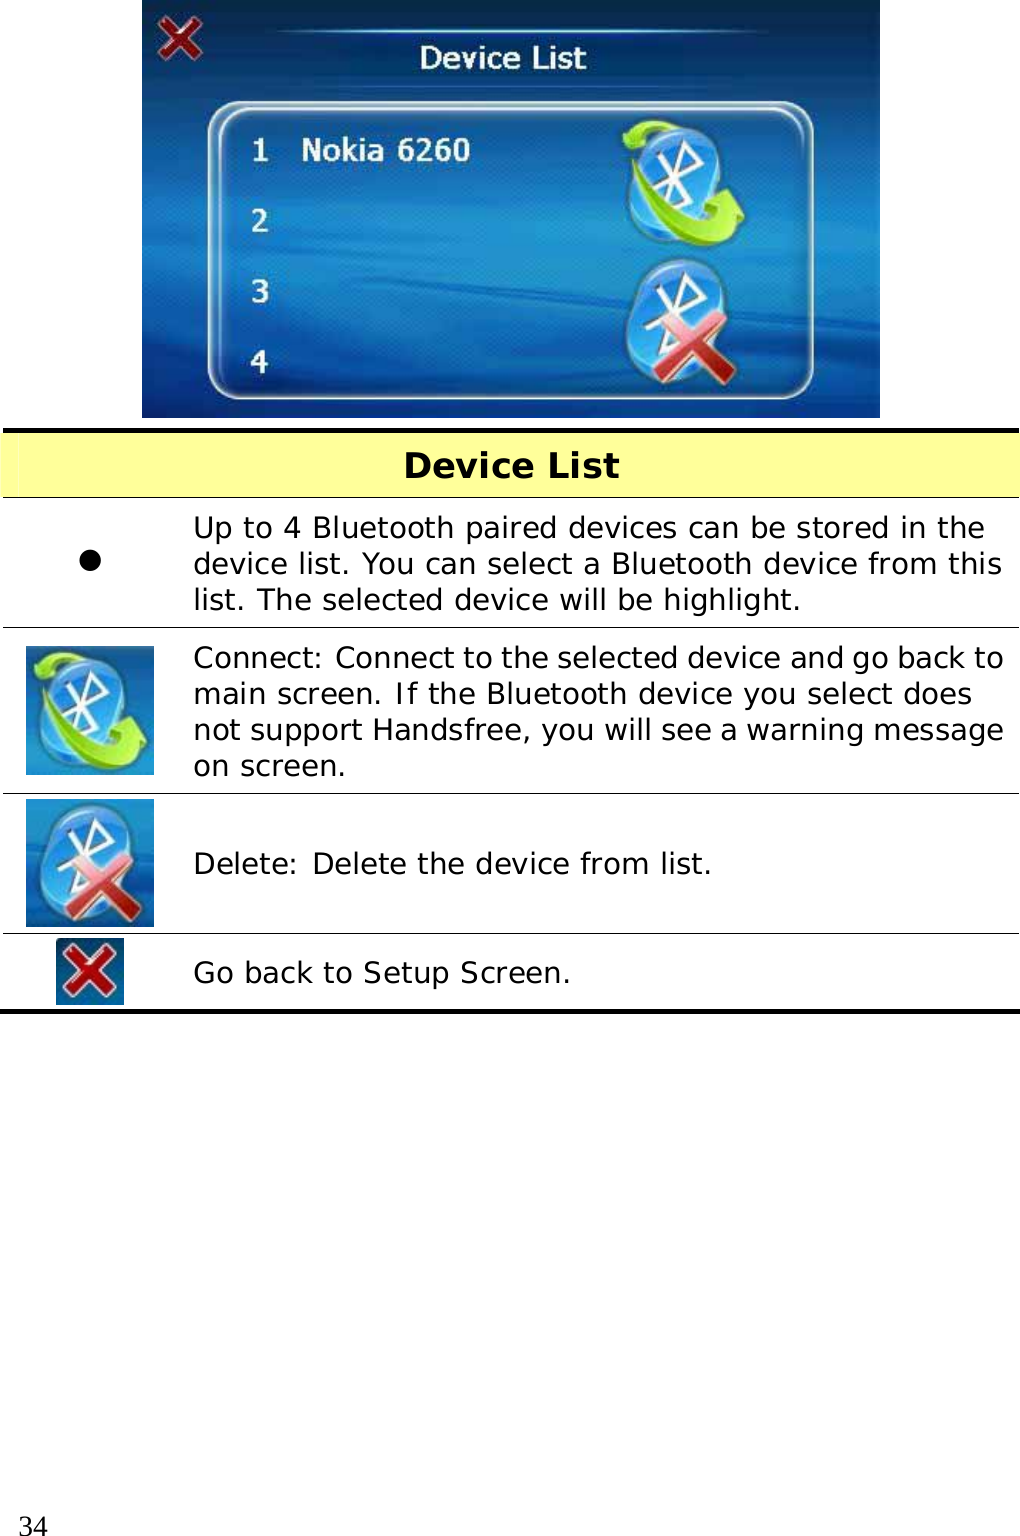  34   Device List z Up to 4 Bluetooth paired devices can be stored in the device list. You can select a Bluetooth device from this list. The selected device will be highlight.   Connect: Connect to the selected device and go back to main screen. If the Bluetooth device you select does not support Handsfree, you will see a warning message on screen.  Delete: Delete the device from list.  Go back to Setup Screen.  